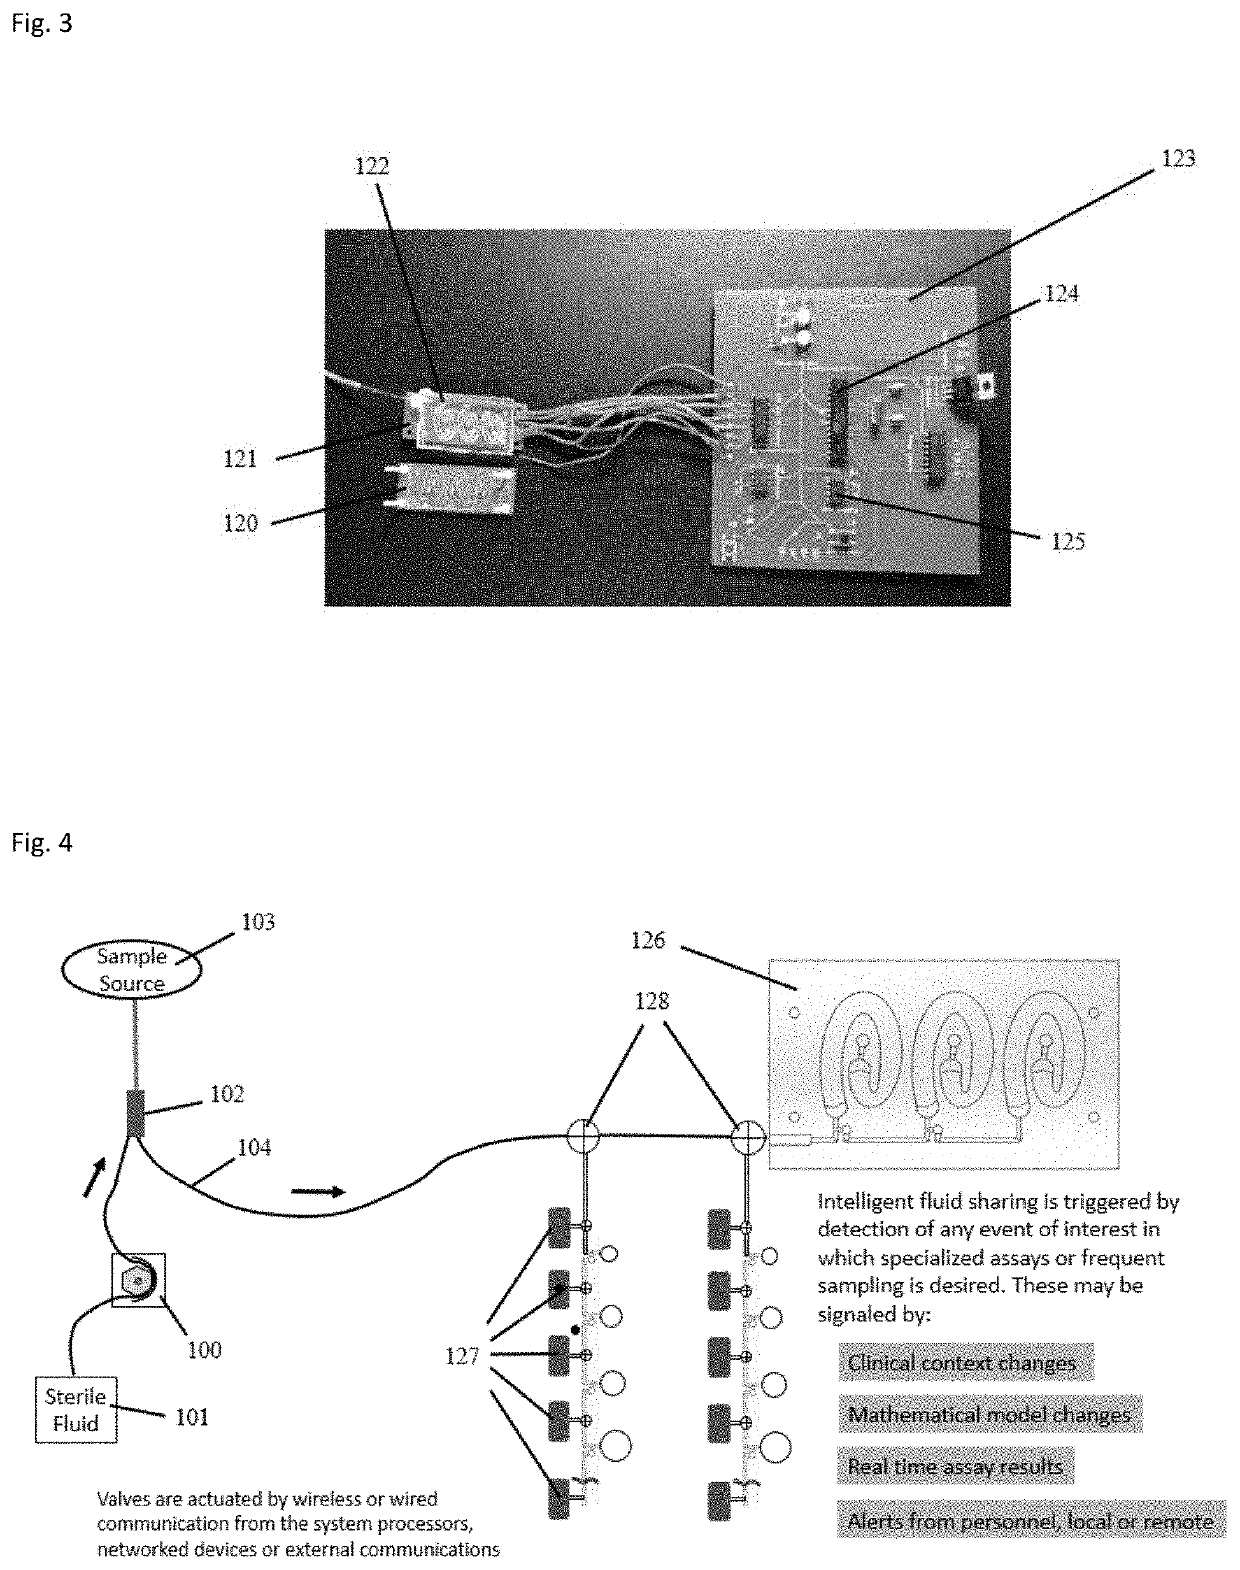 Computerized Fluidic System and Methods of Use for Characterization of Molecular Networks in Complex Systems with Automated Sampling, Data Collection, Assays and Data Analytics